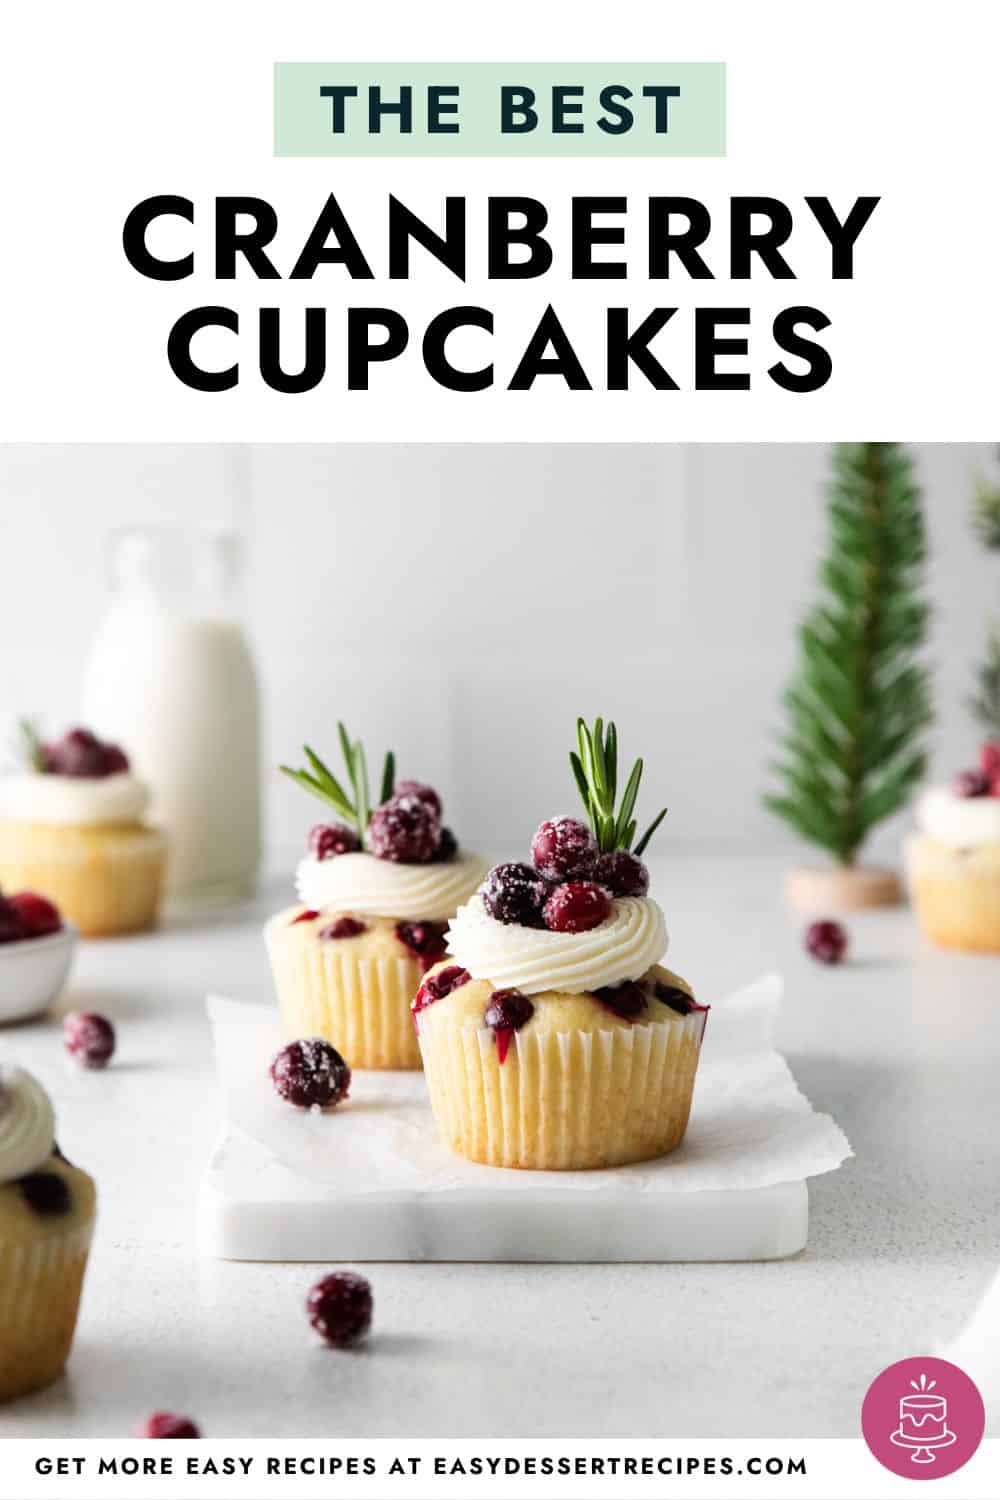 The best cranberry cupcakes.